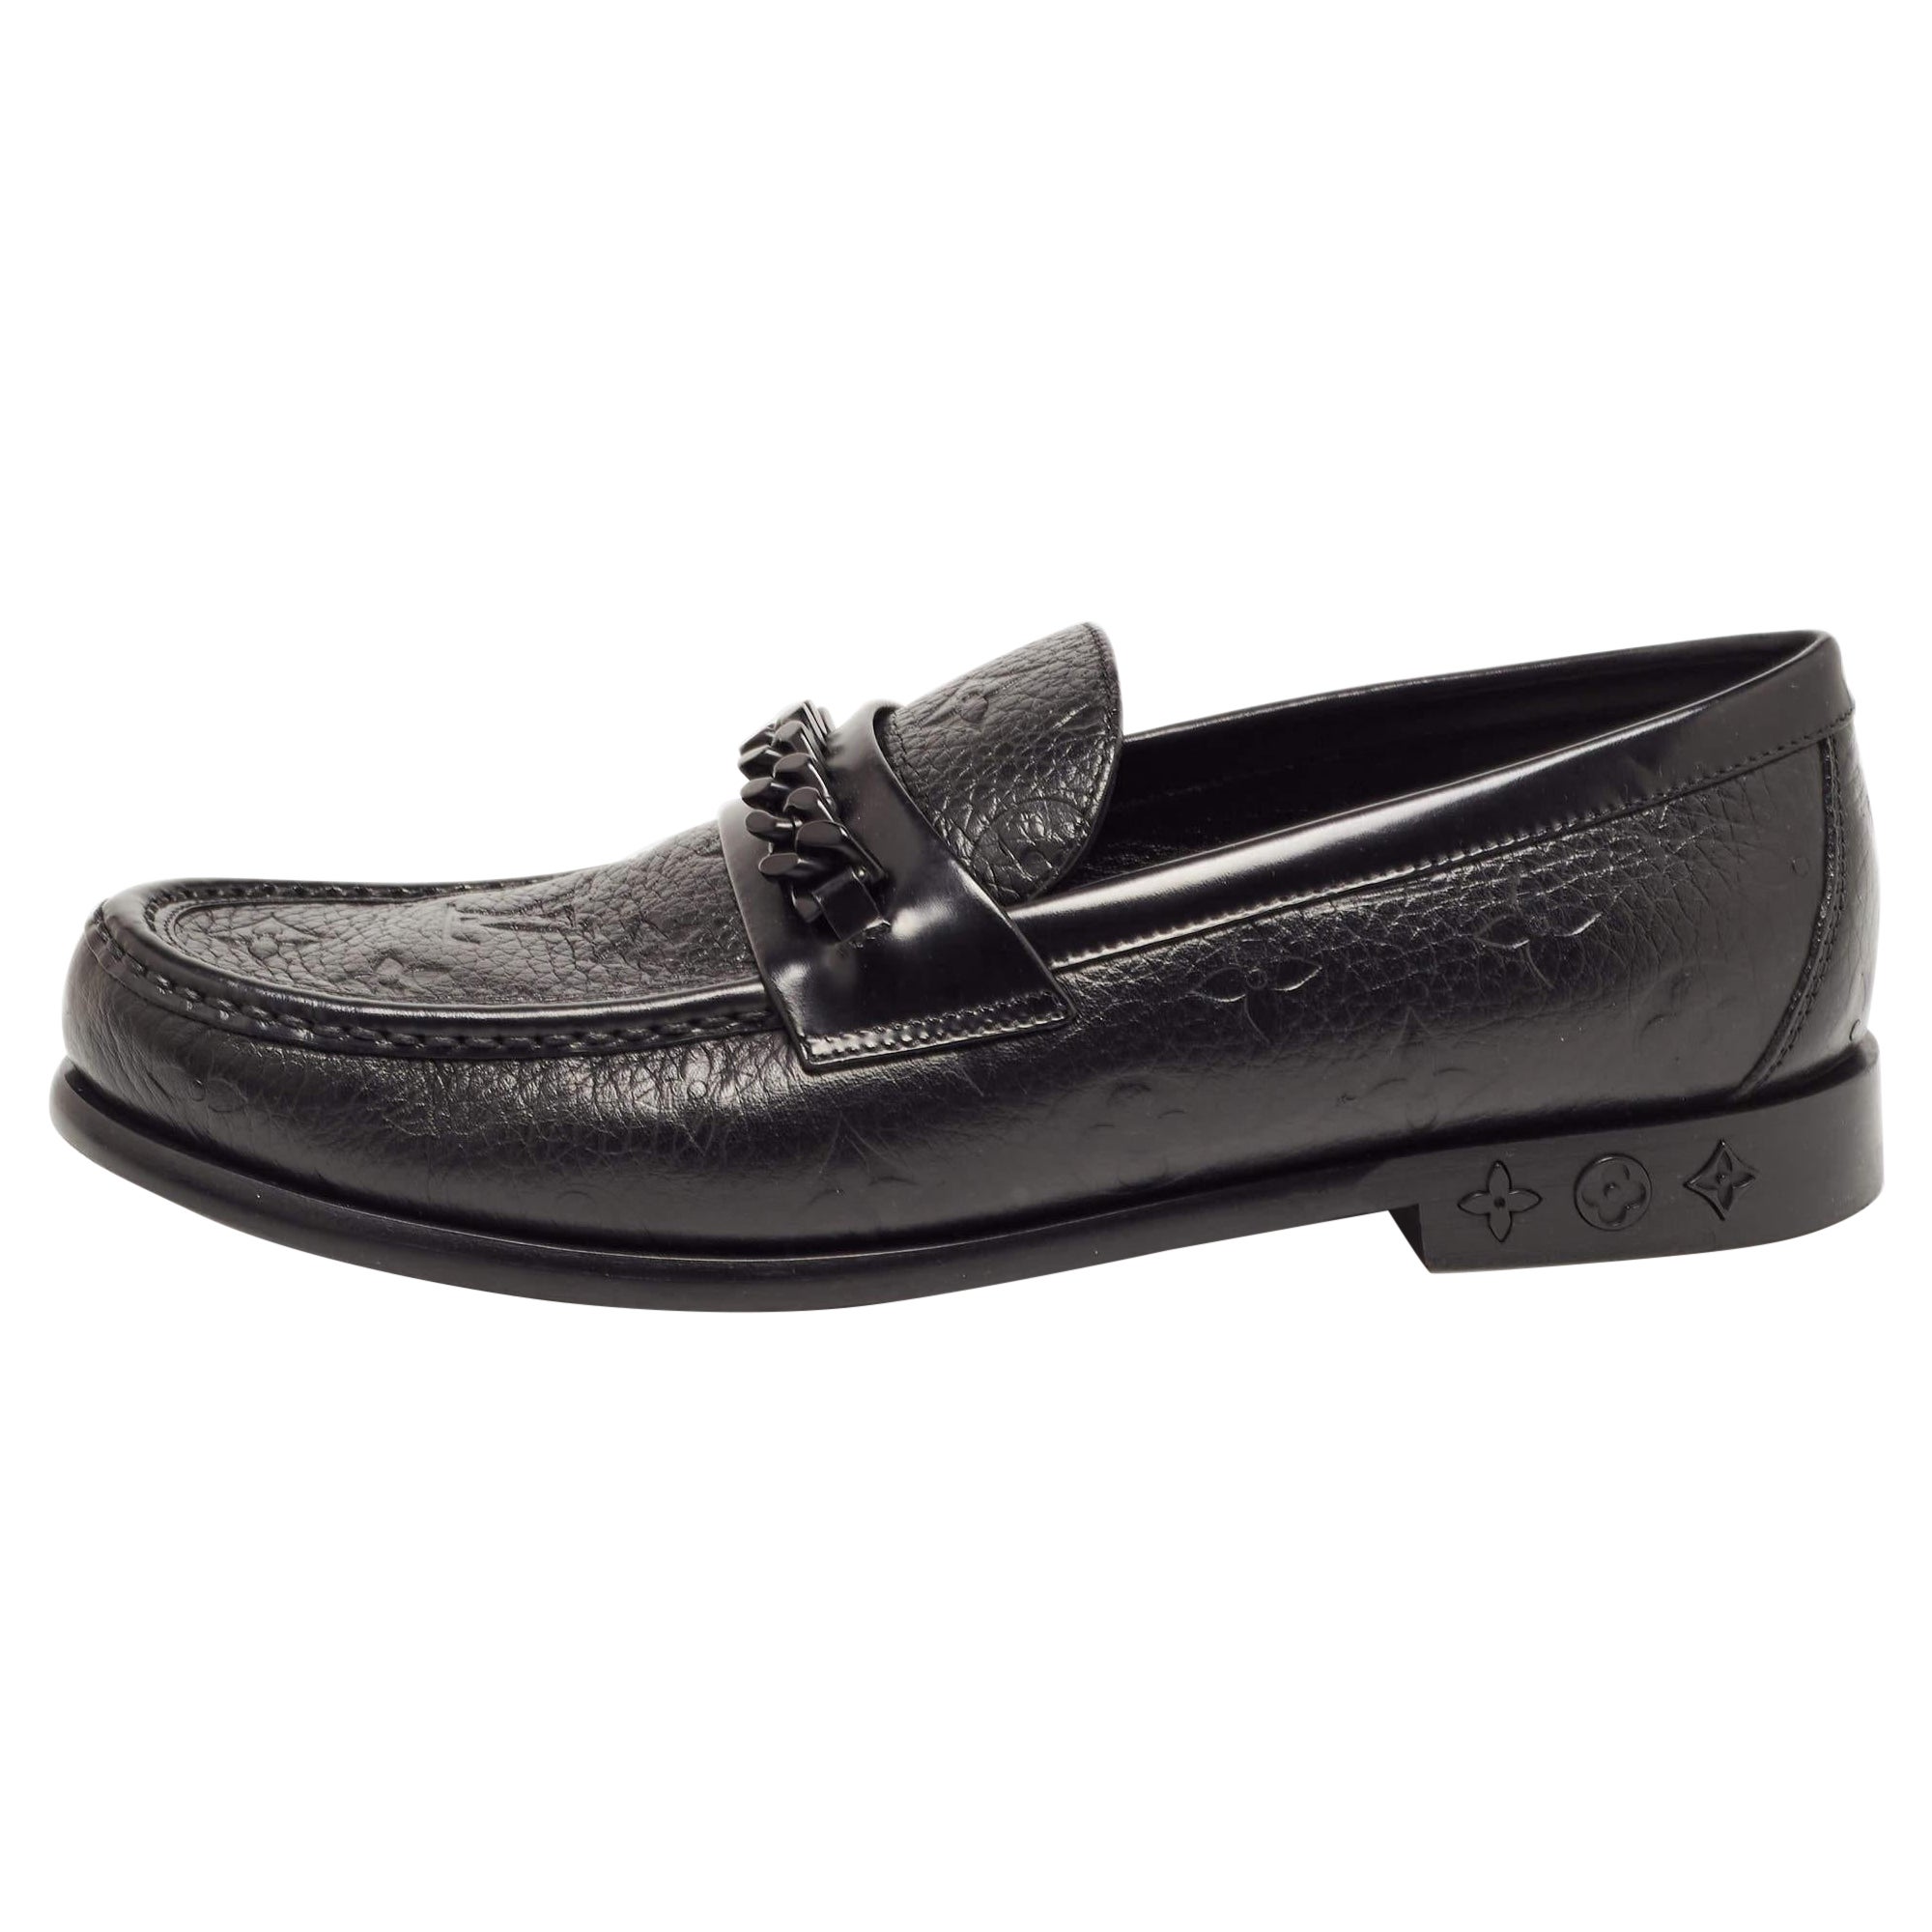 Louis Vuitton Black Leather Slip On Loafers Size 40.5 For Sale